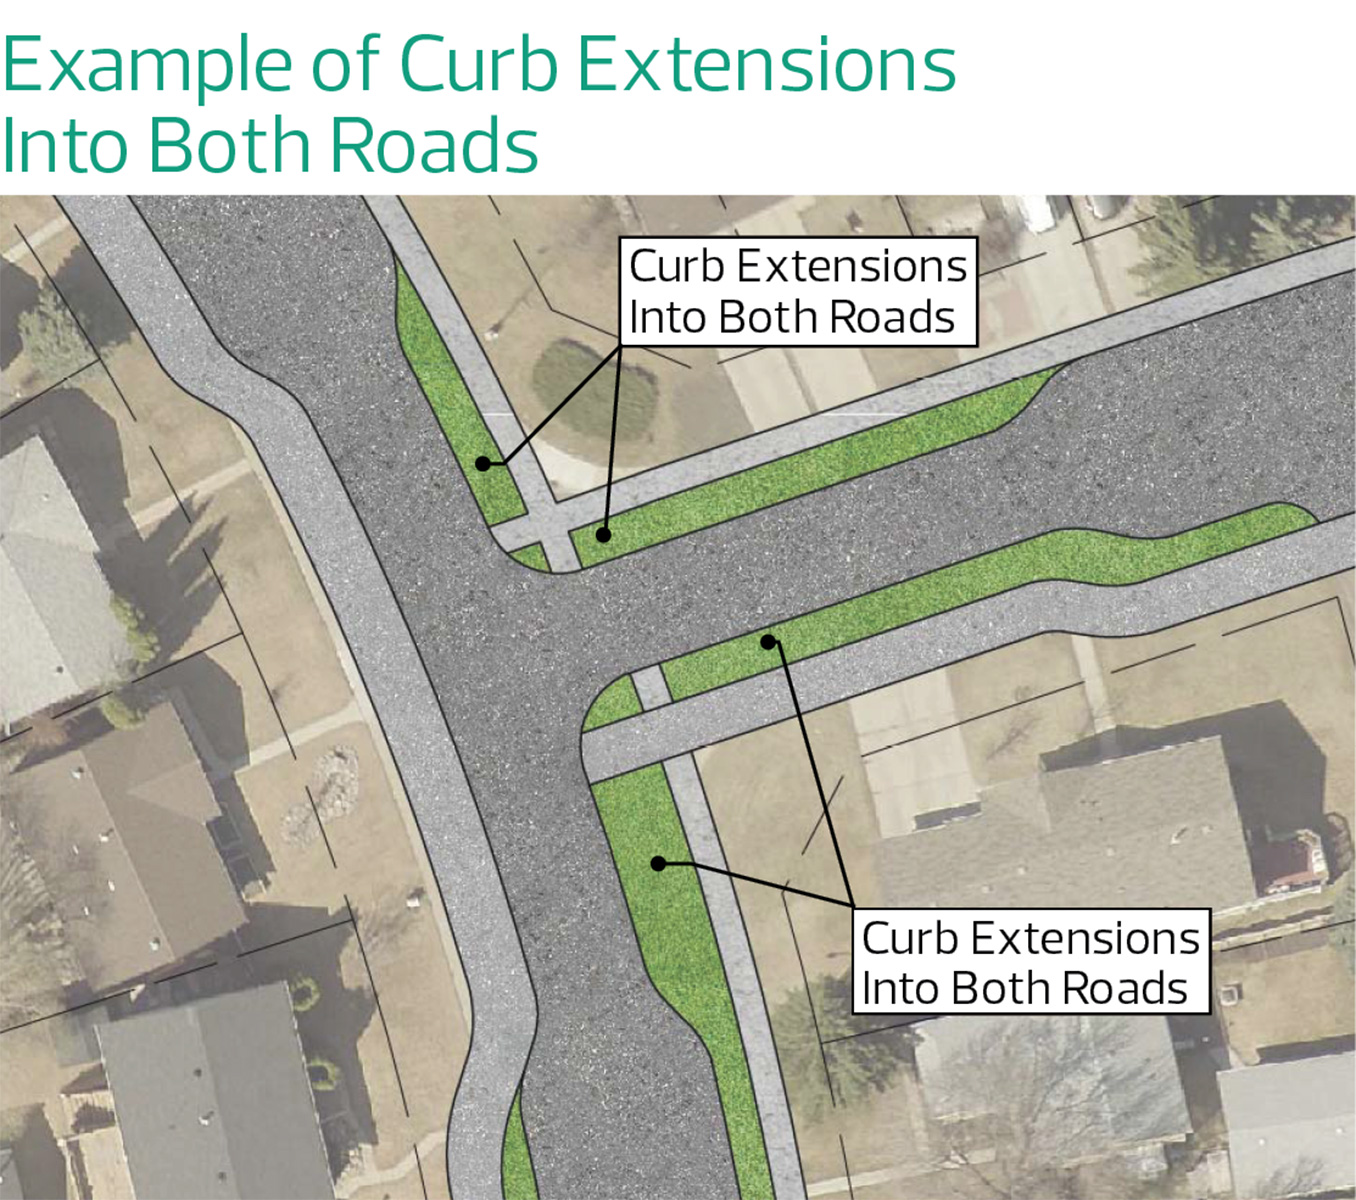 07 Curb Extensions Into Both Roads